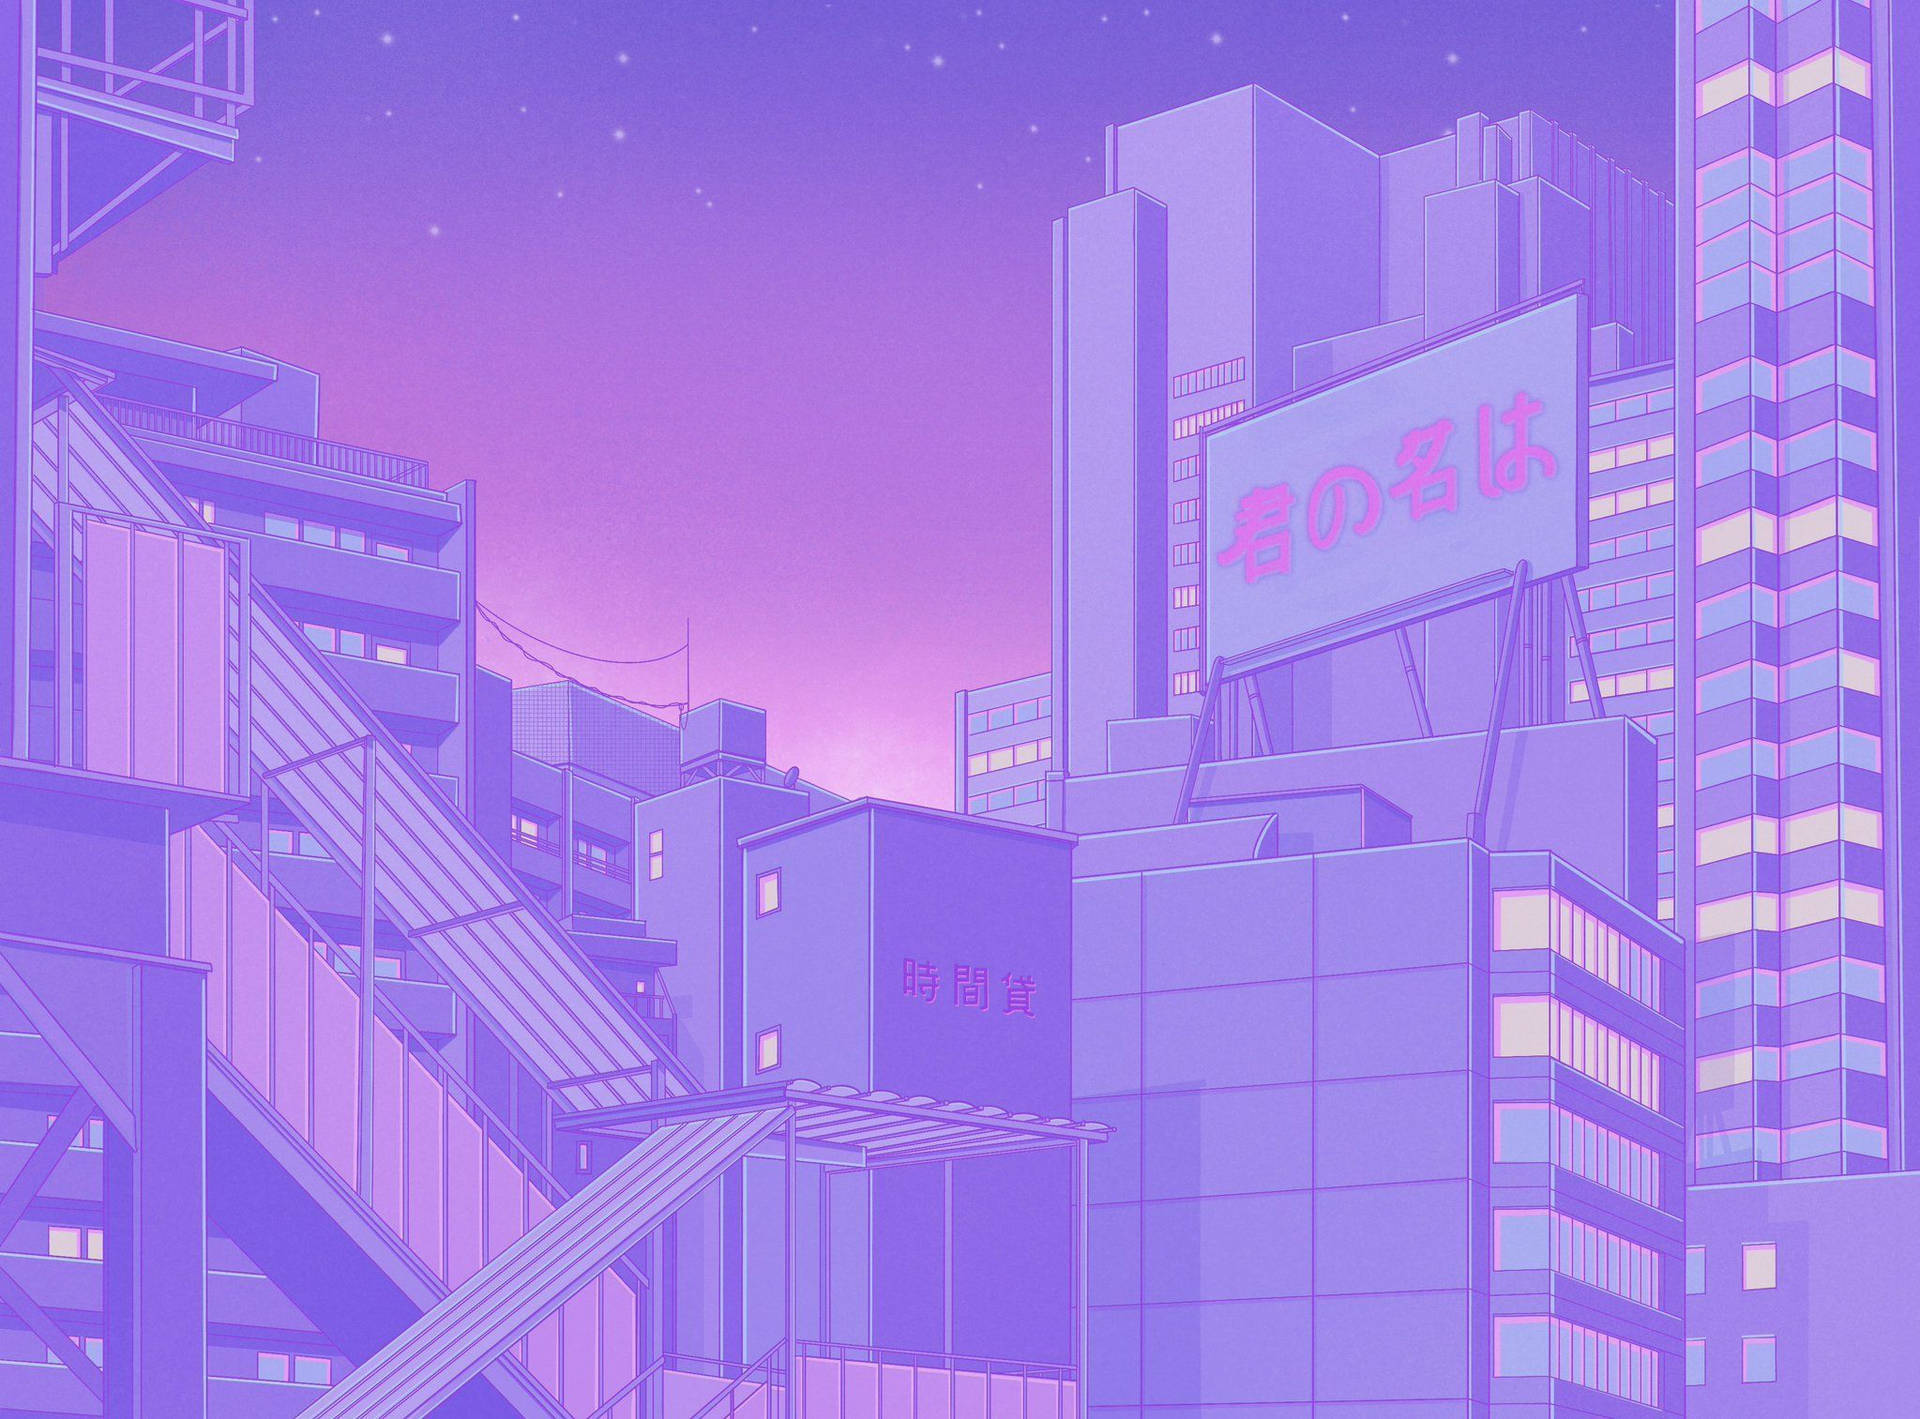 Looking for wallpapers with classical anime art style  90s  80s japanese  city pop style  rwallpaperengine